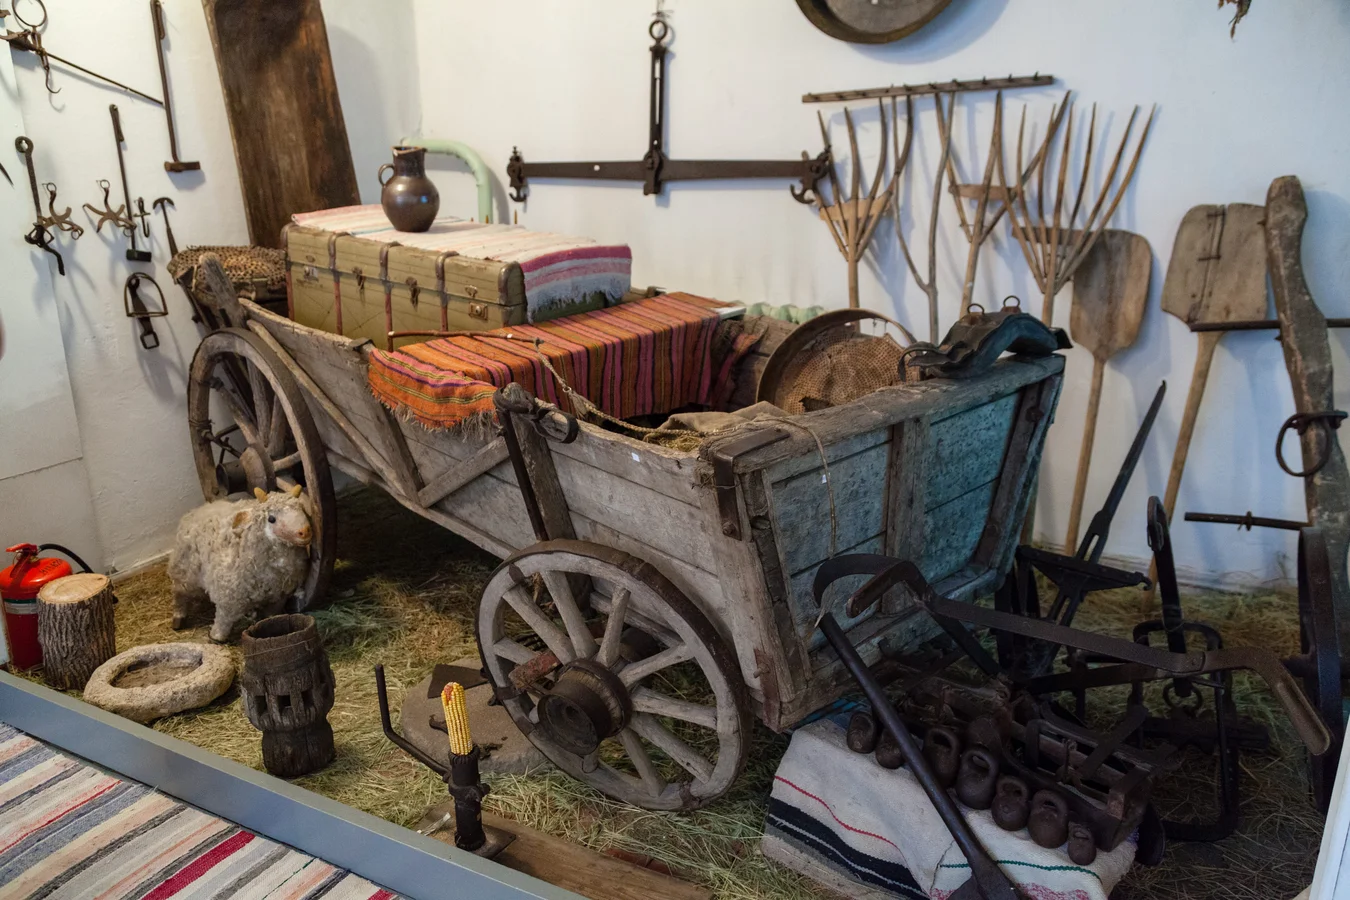 Exhibits from the Sartana Local History Museum, brought by villagers from Crimea. Source: https://localhistory.org.ua/texts/reportazhi/mariupol-tse-ukrayina/